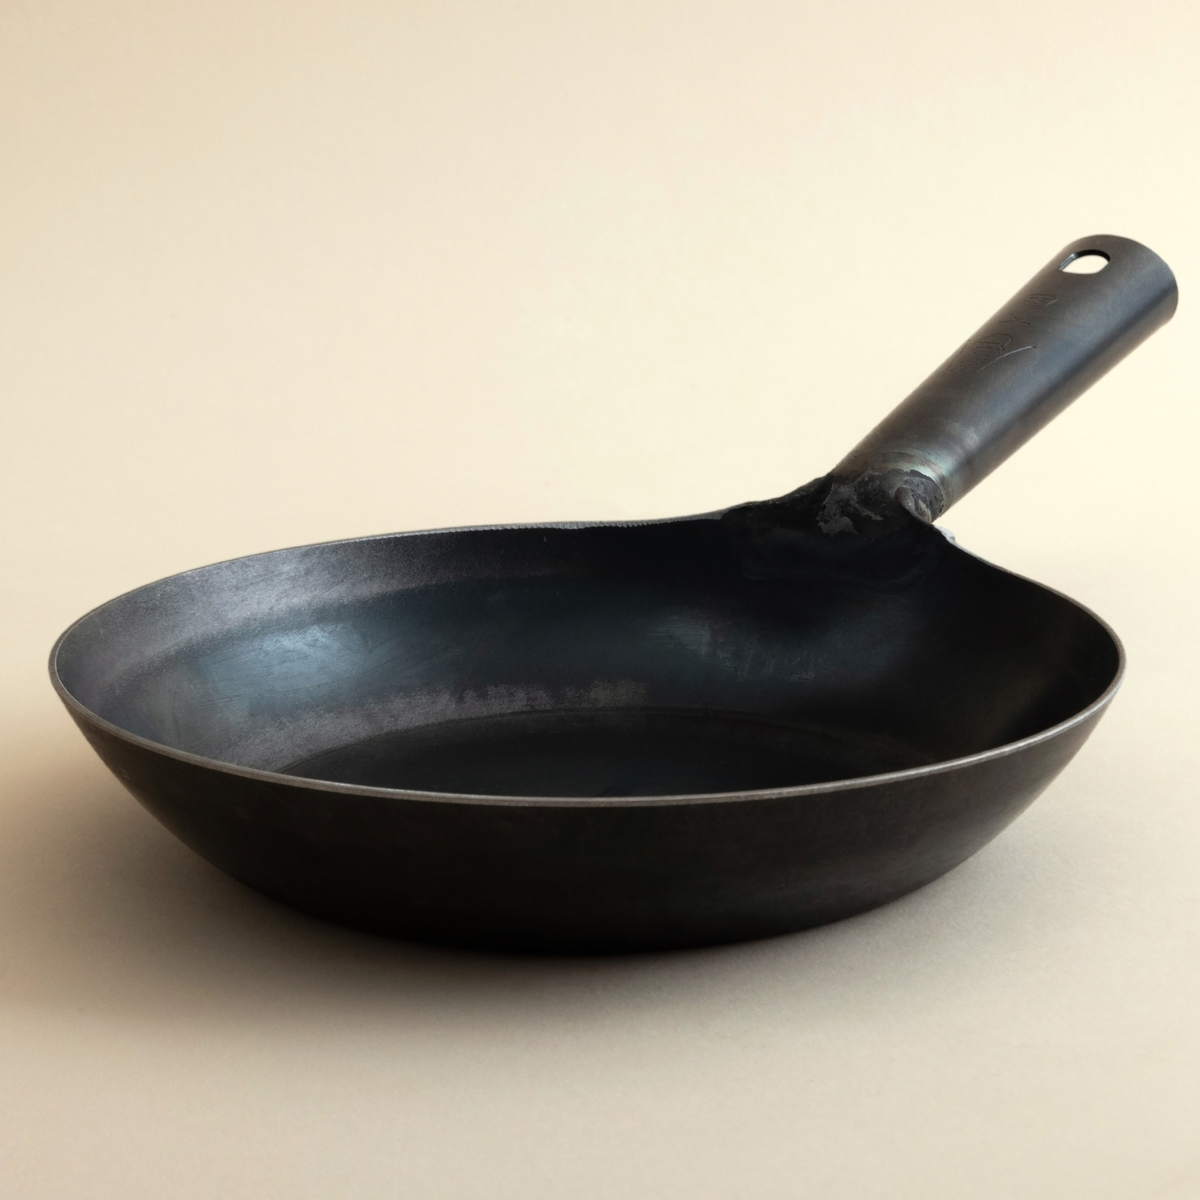 Hammered Frying Pan